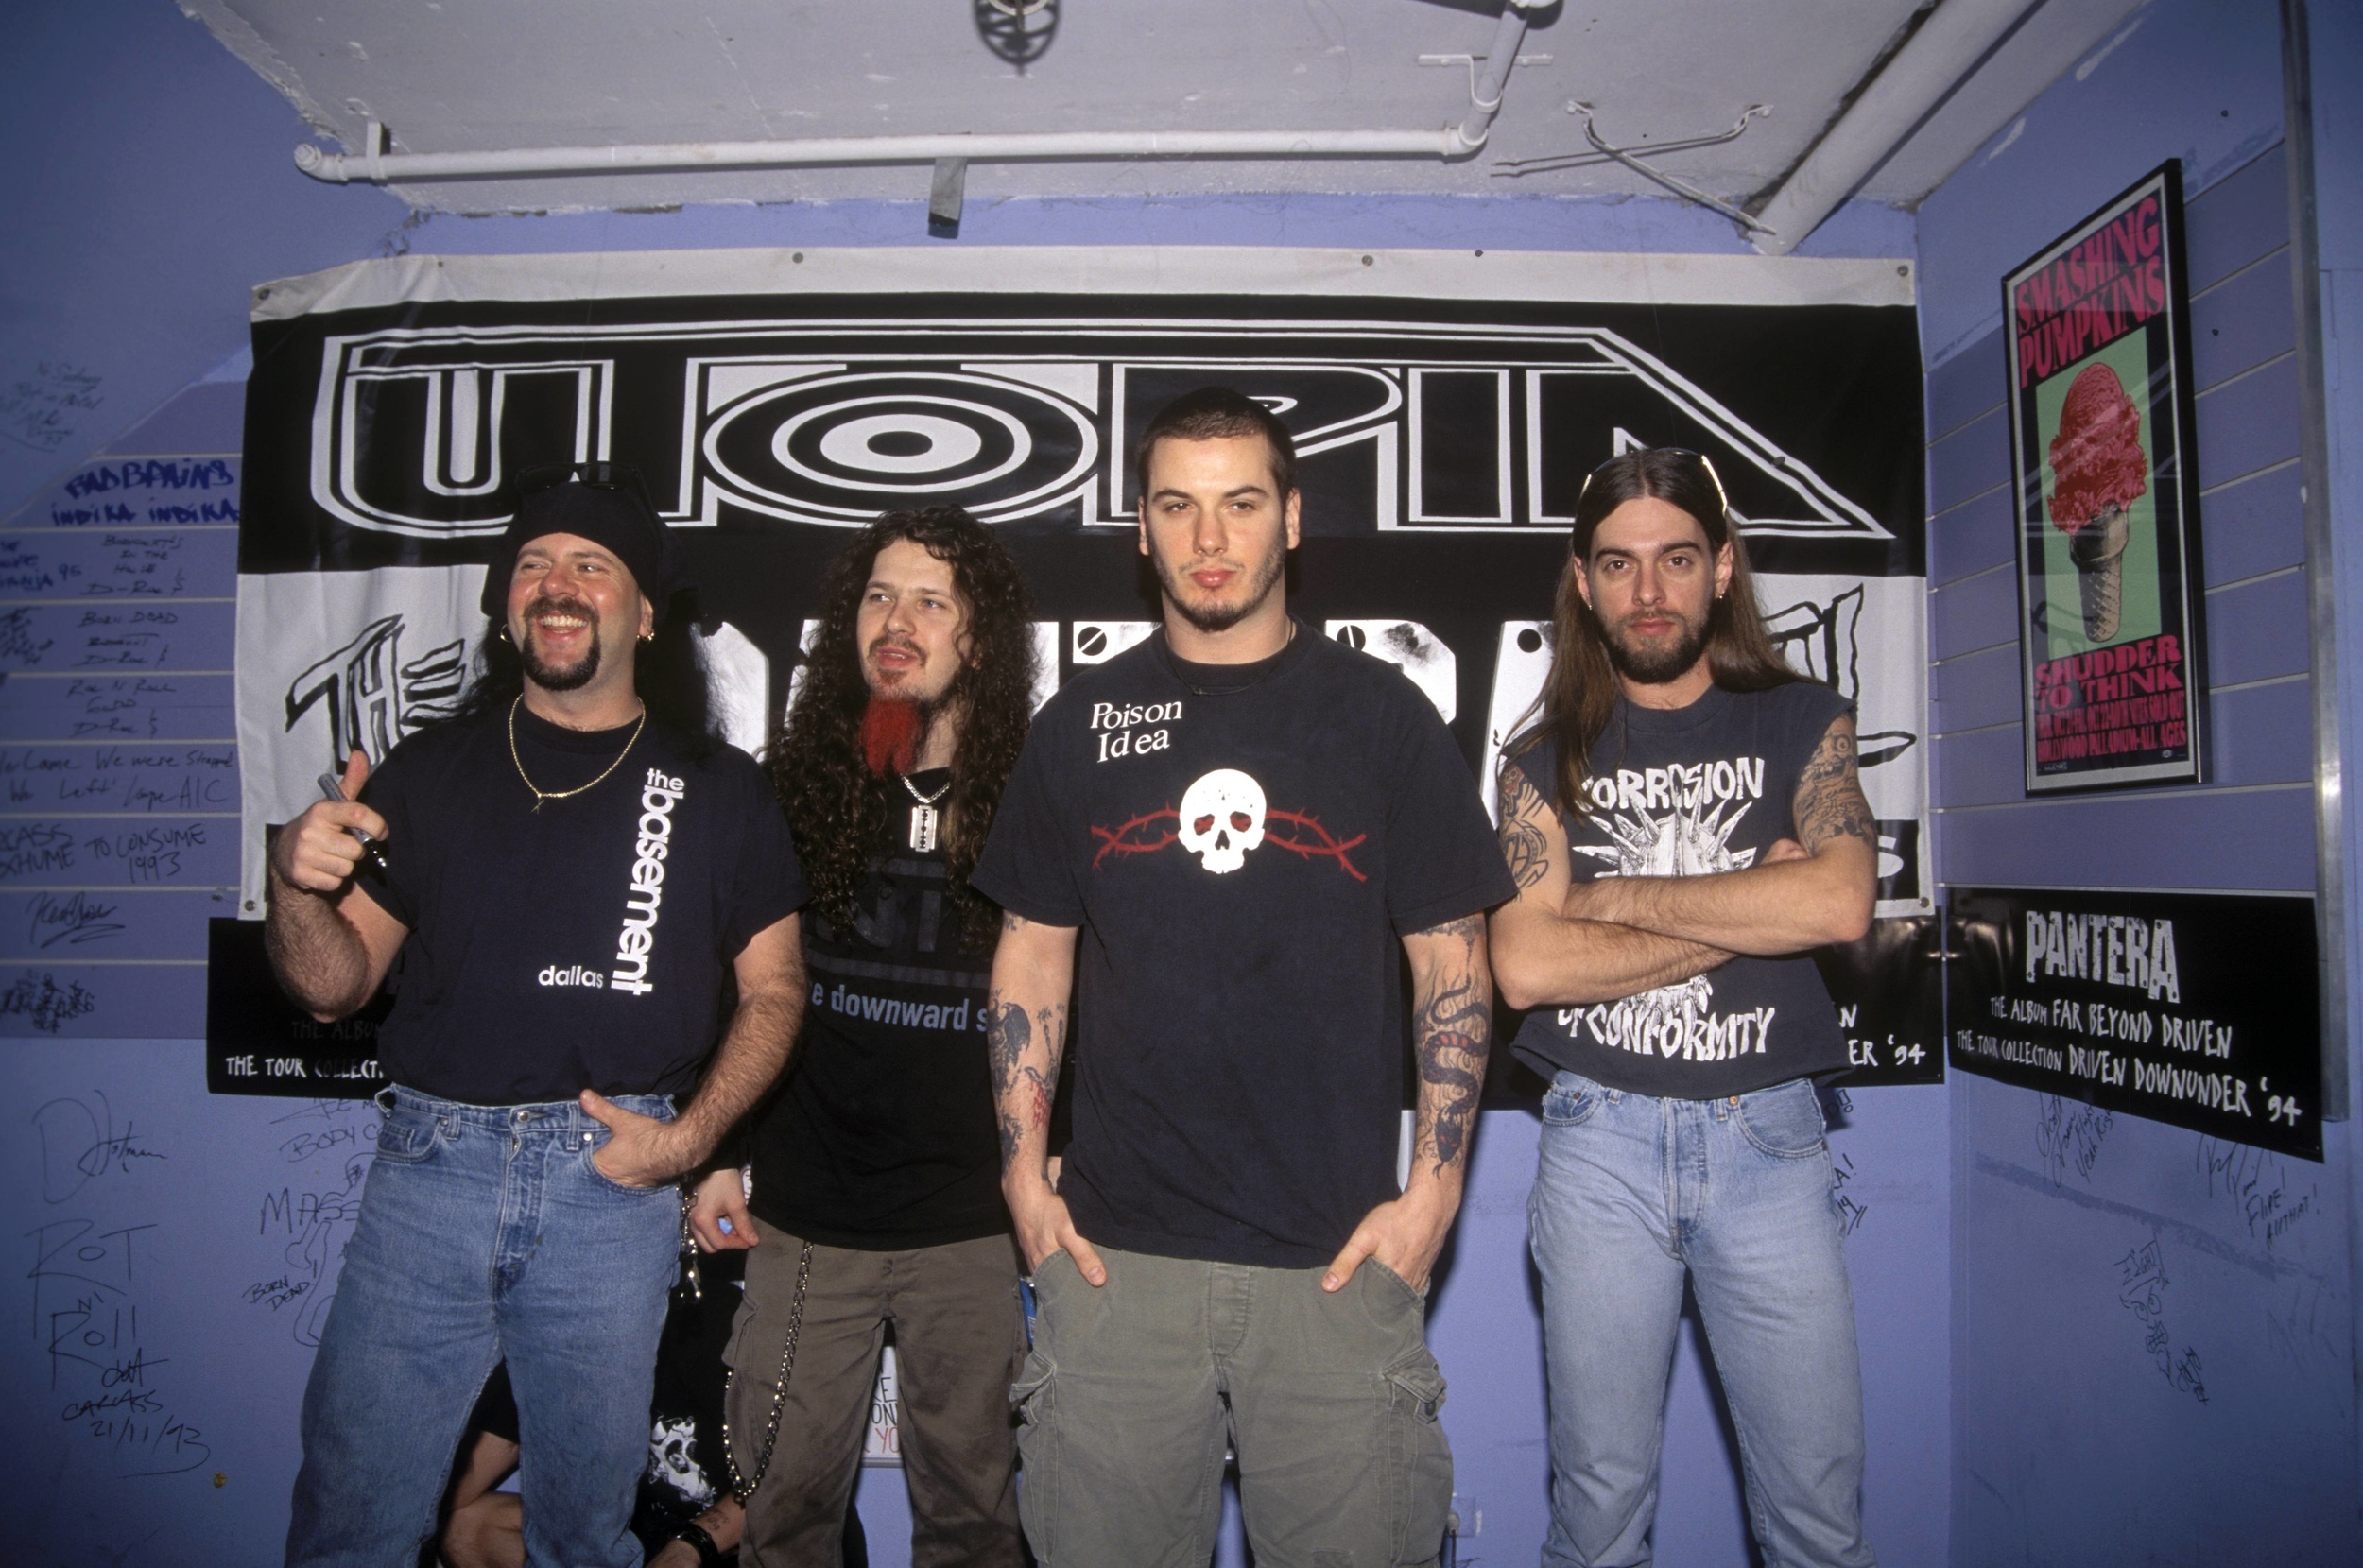 <p>In the early days of Pantera, when the band was a favorite in the Southwest, its sound was heavy but comparable <a href="https://www.youtube.com/watch?v=amq9It9dRjs">to those glam metal bands of the early-to-mid 1980s</a>. Pantera was the support act for hair rockers like Dokken and Stryper. Pantera's first three records got progressively heavier with each release, but they were still very much rooted in glam. However, when singer Phil Anselmo joined in the late '80s, he was heavily influenced by the burgeoning thrash metal scene. That was obvious on <em>Power Metal</em> (1988), Pantera's first album with Anselmo. Though it would be two years later, with <a href="https://www.youtube.com/watch?v=WYfljBCpmE4"><em>Cowboys from Hell</em></a>, the band's major-label debut, that its mix of groove, speed, and thrash metal unveiled an influential sound that paved the way for some extensive international success.</p><p><a href='https://www.msn.com/en-us/community/channel/vid-cj9pqbr0vn9in2b6ddcd8sfgpfq6x6utp44fssrv6mc2gtybw0us'>Follow us on MSN to see more of our exclusive entertainment content.</a></p>